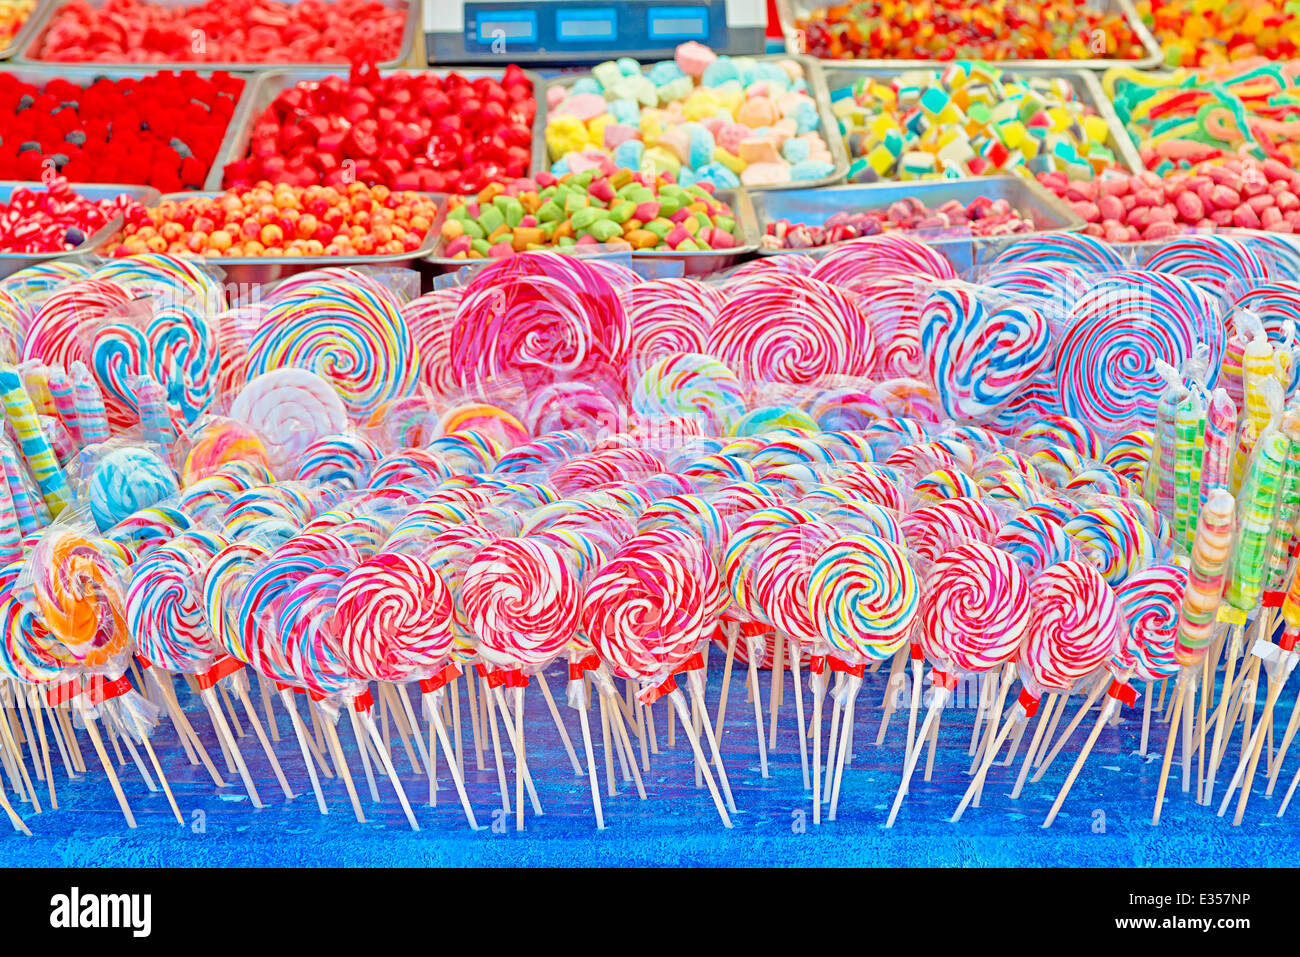 Colorful sweets, candies and lollipops at street market Stock Photo